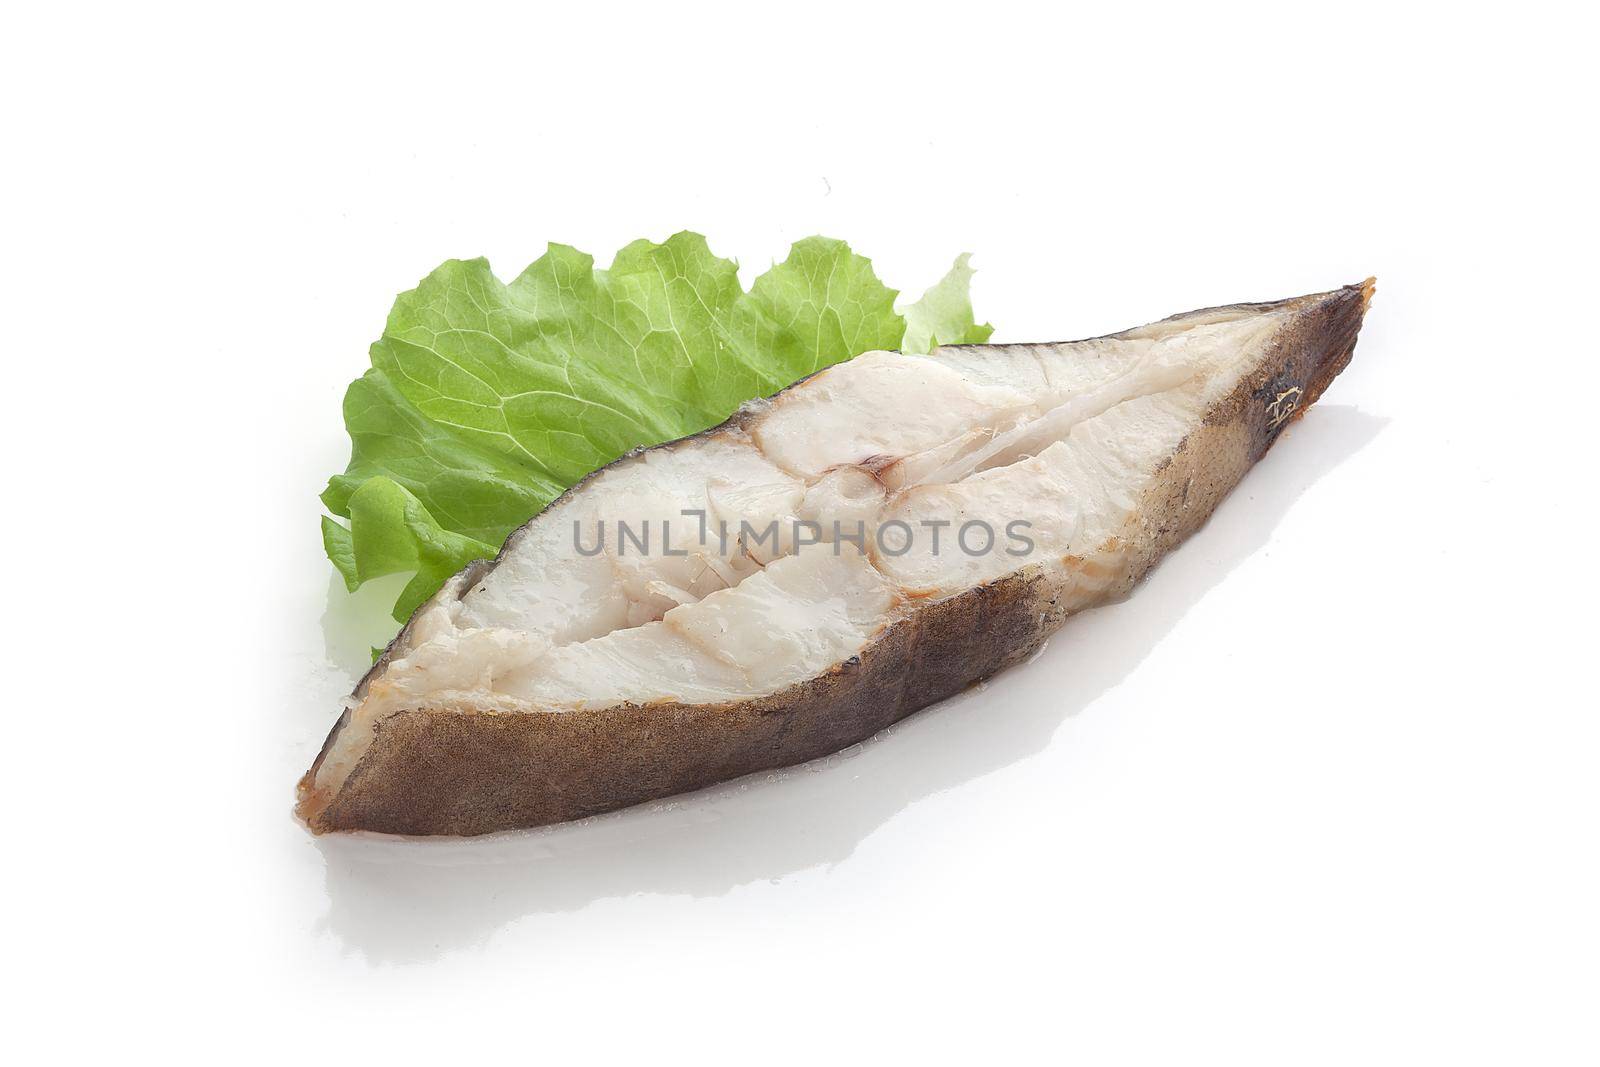 Roasted halibut steak with lettuce by Angorius